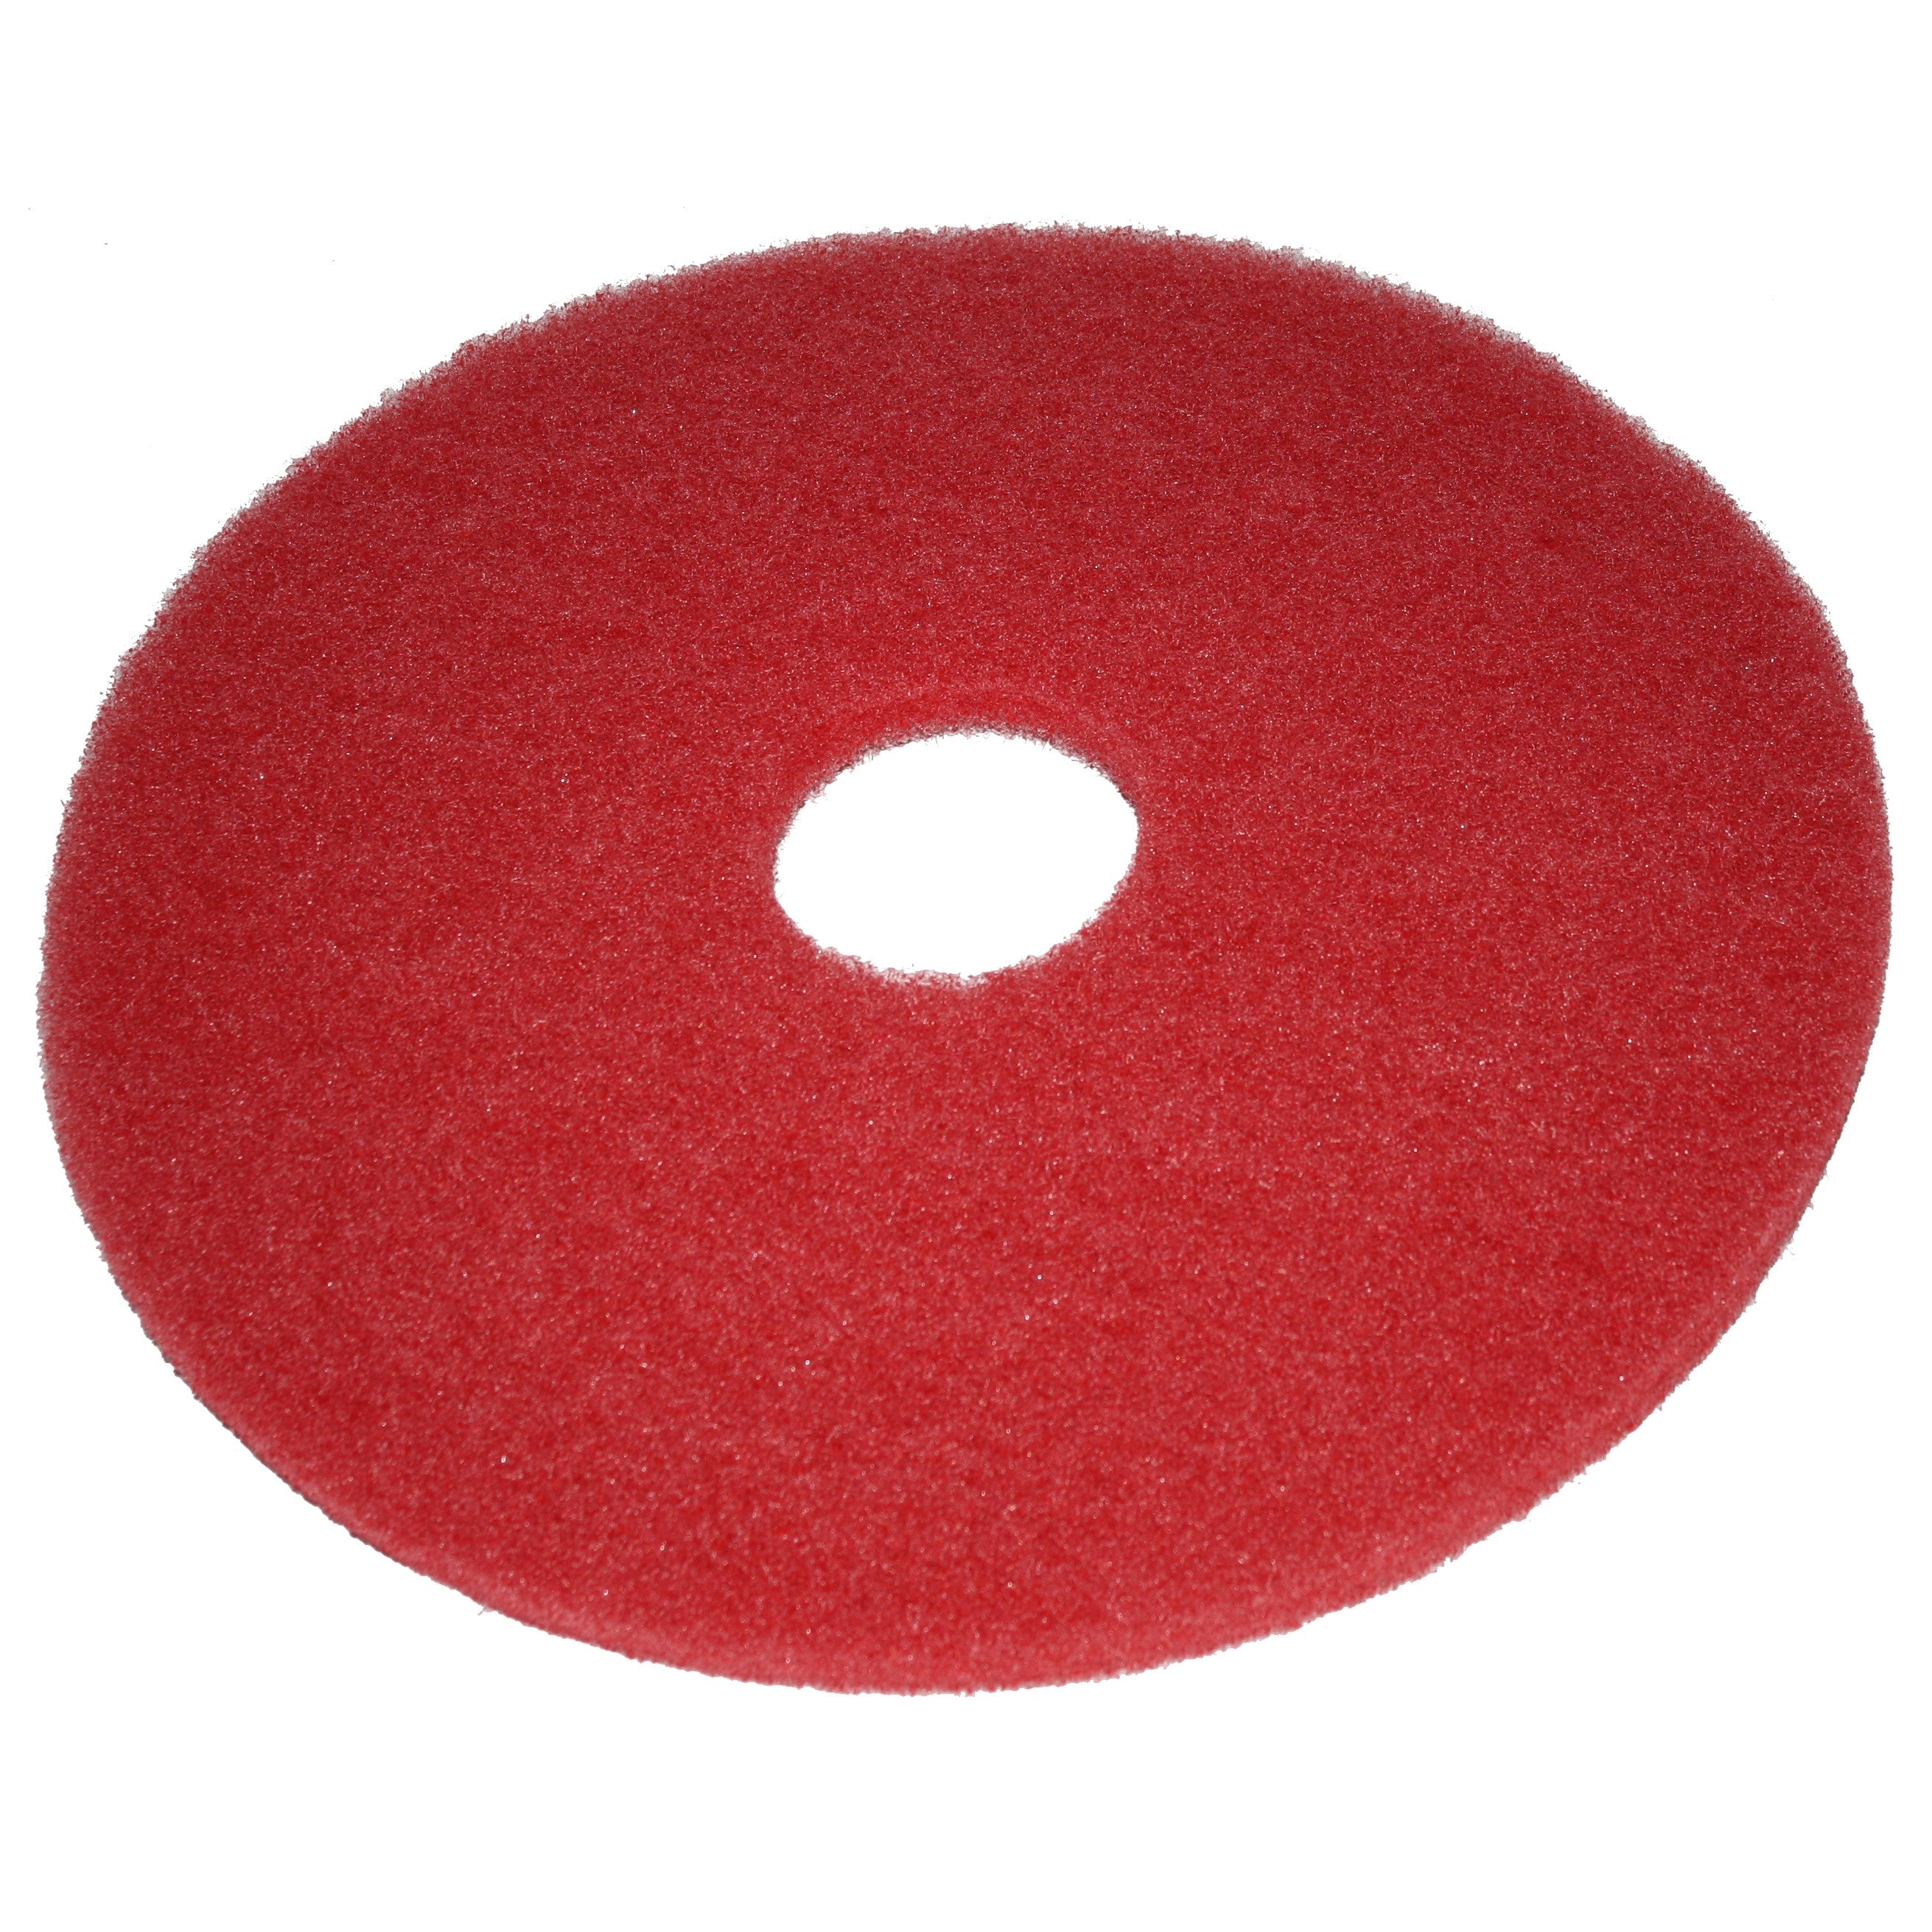 Pad rouge, Ø 406 mm, polyester